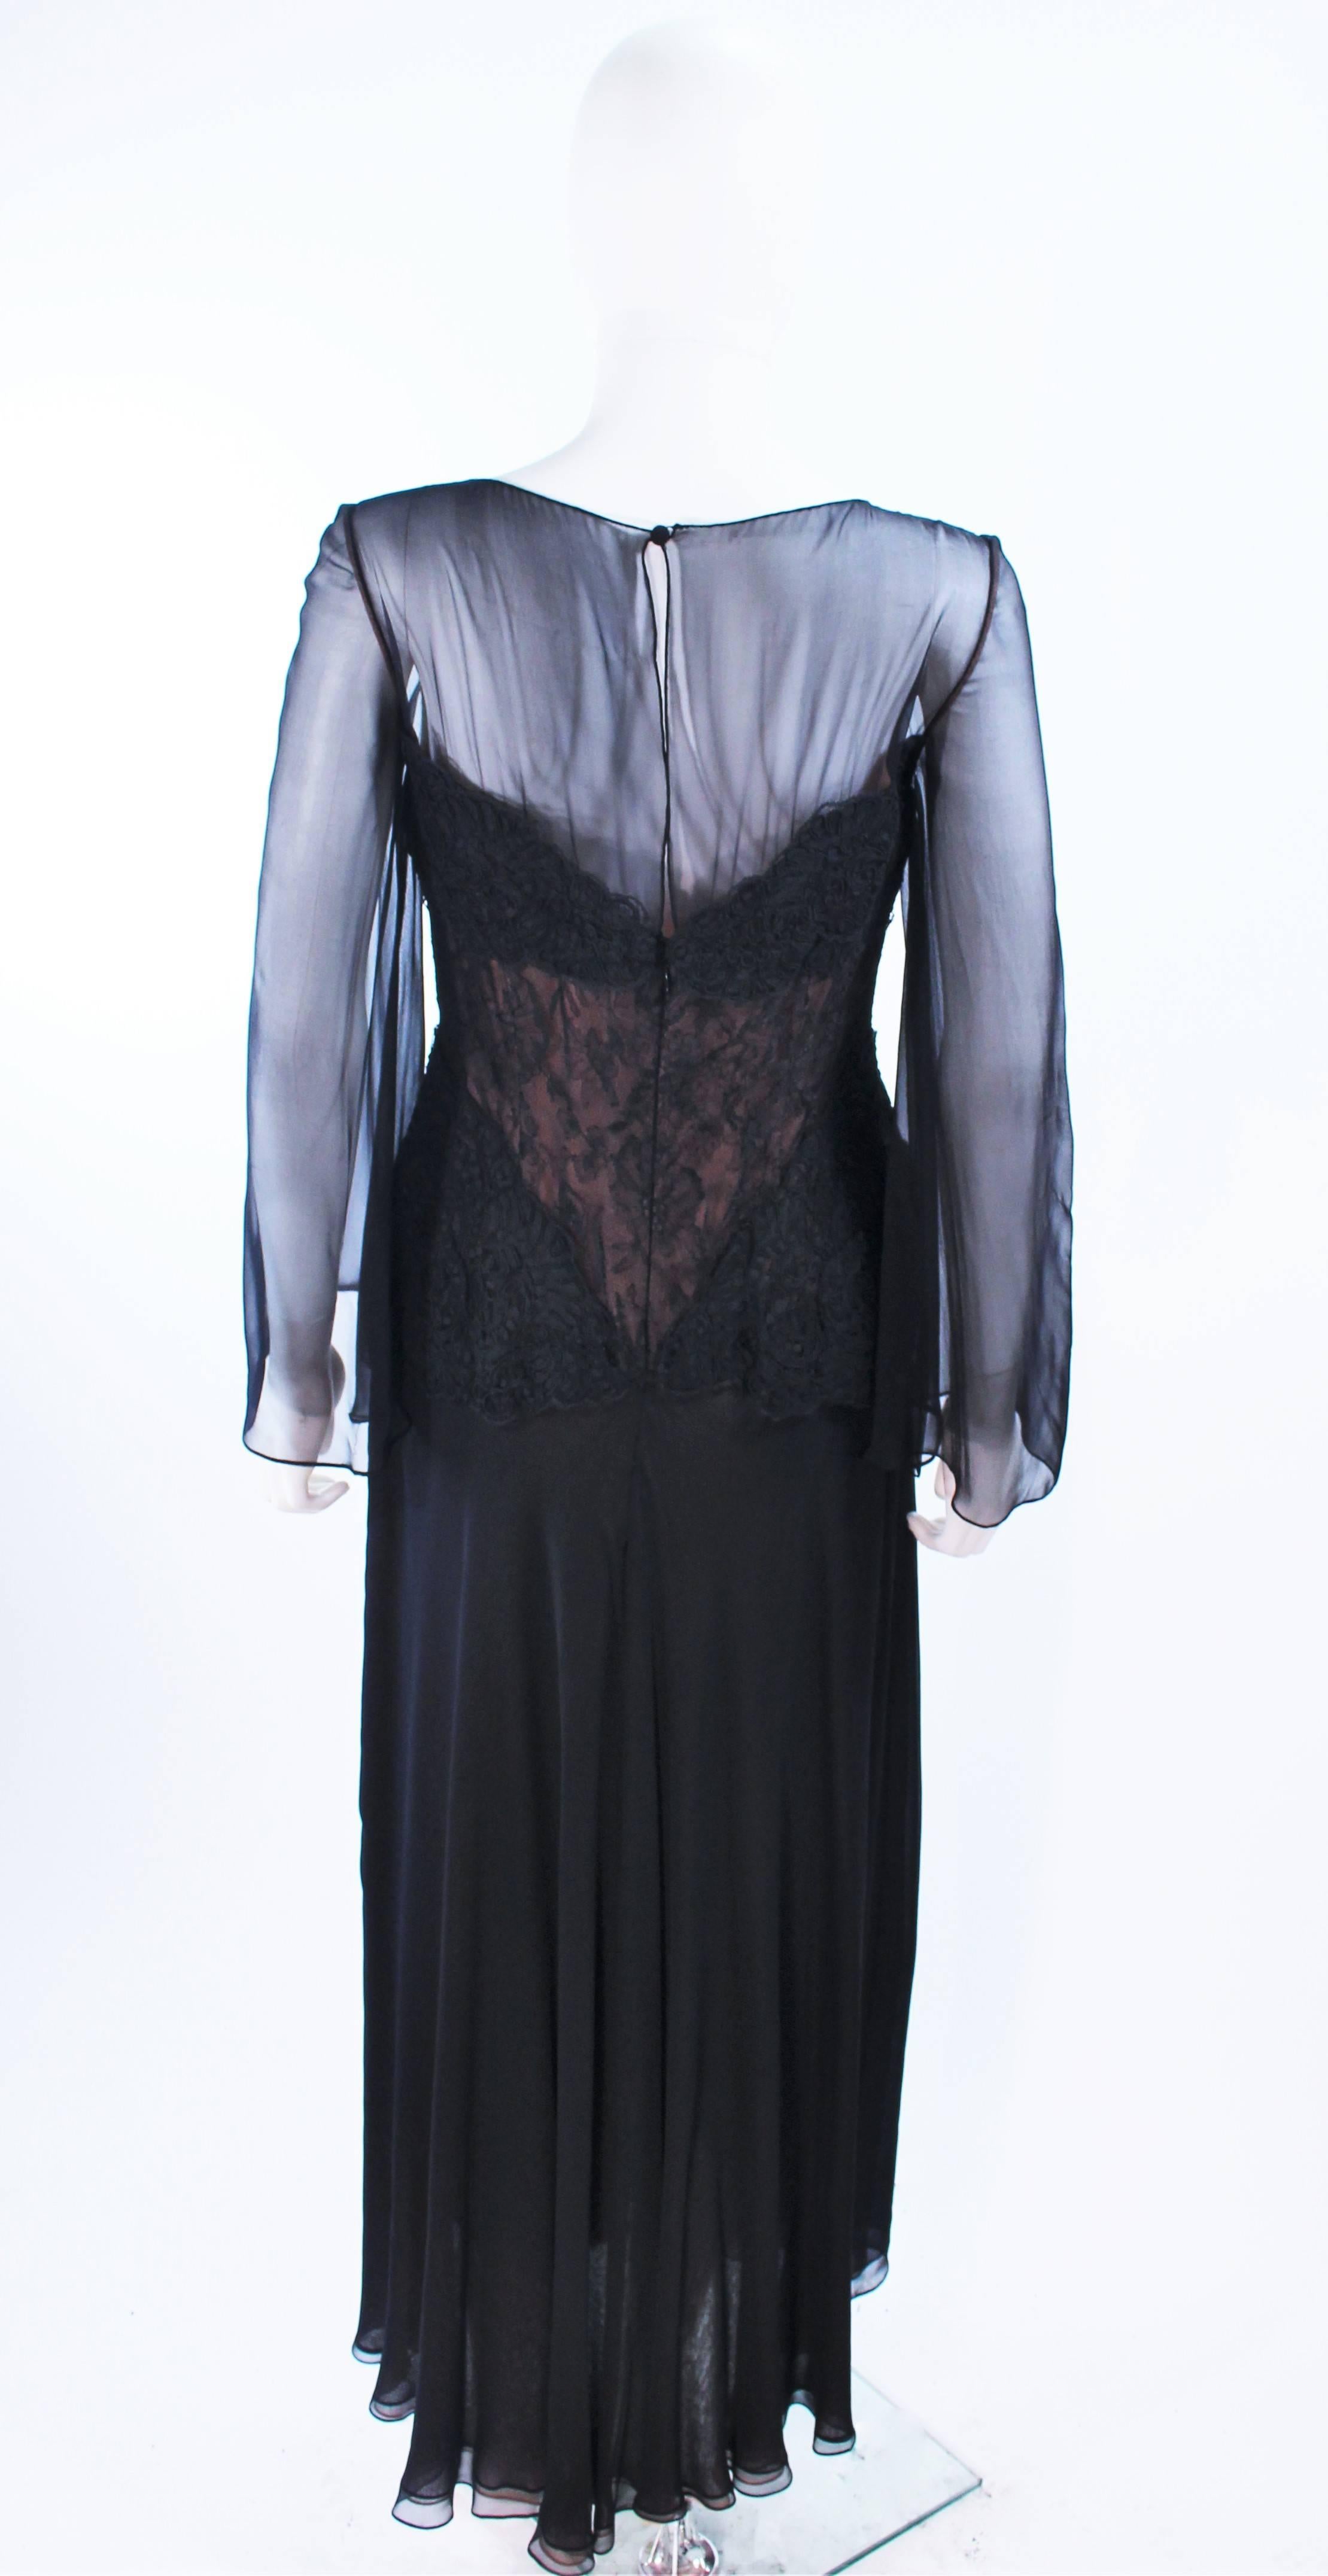 BILL BLASS Black Lace Chiffon Gown with Nude Underlay Size 10 12 For Sale 5